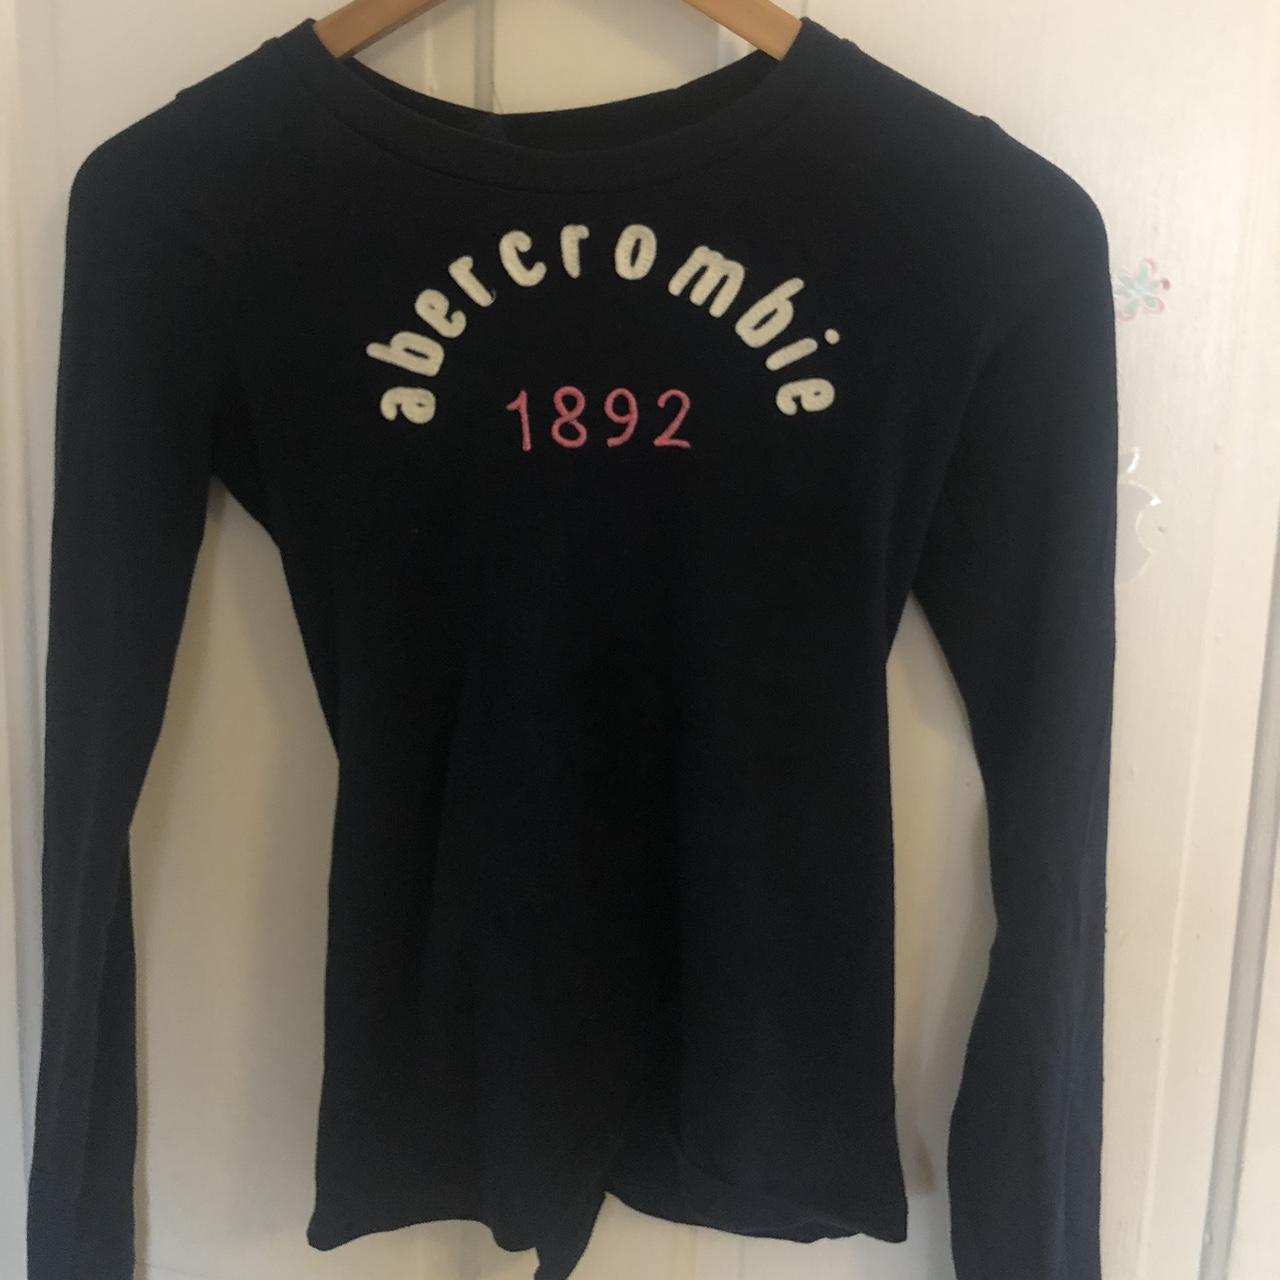 Abercrombie & Fitch Women's Navy and Pink T-shirt (4)